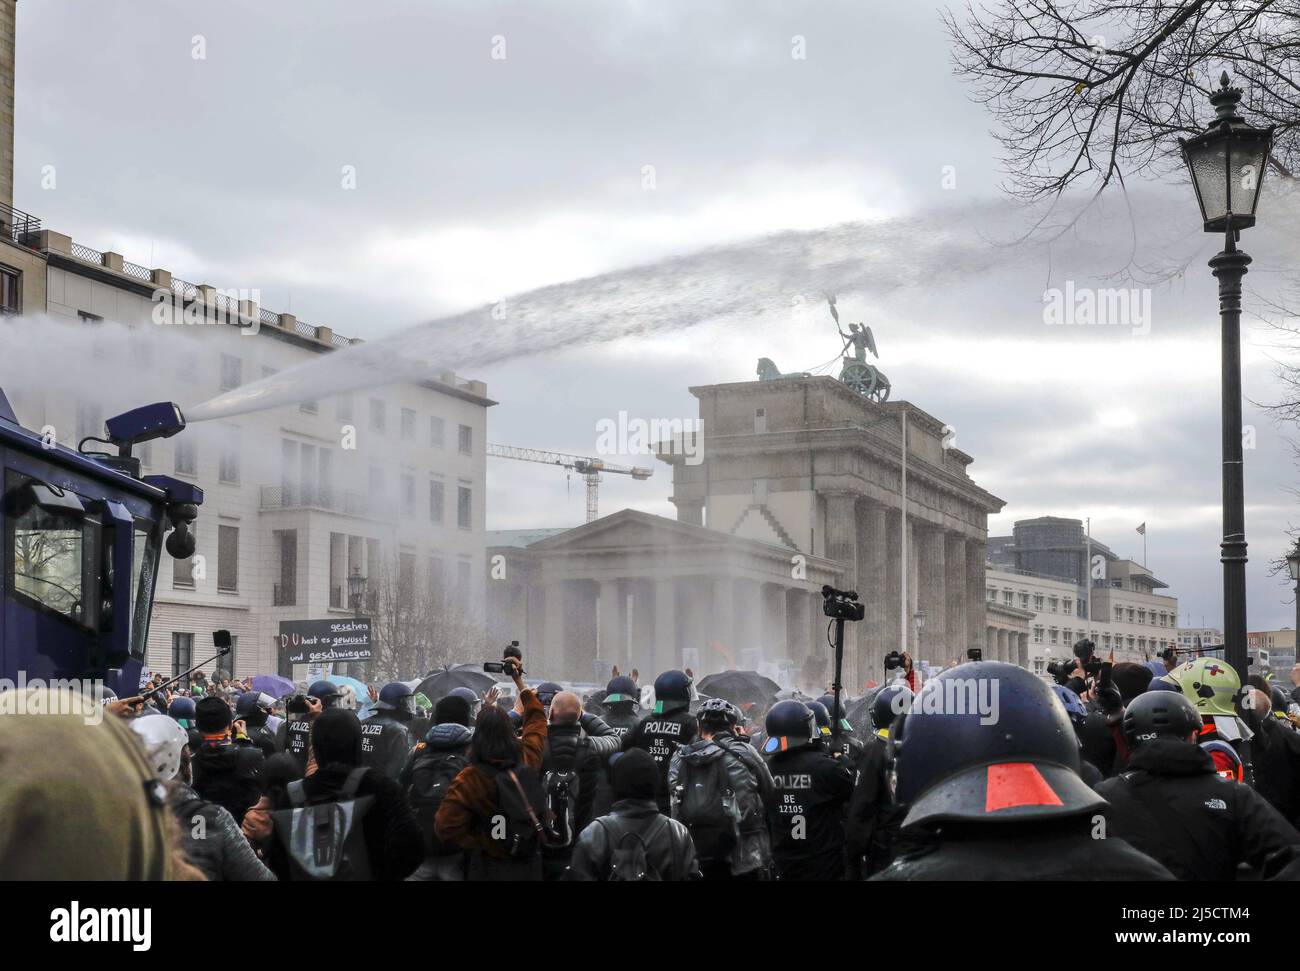 Berlin, DEU, 18.04.2020 - Water cannons in action at the Brandenburg Gate. For the second time, thousands of Corona deniers demonstrate against the restrictions in the pandemic. The police broke up the demonstration for not respecting the distance rule and not wearing mouth and nose protection. The police used water cannons. [automated translation] Stock Photo